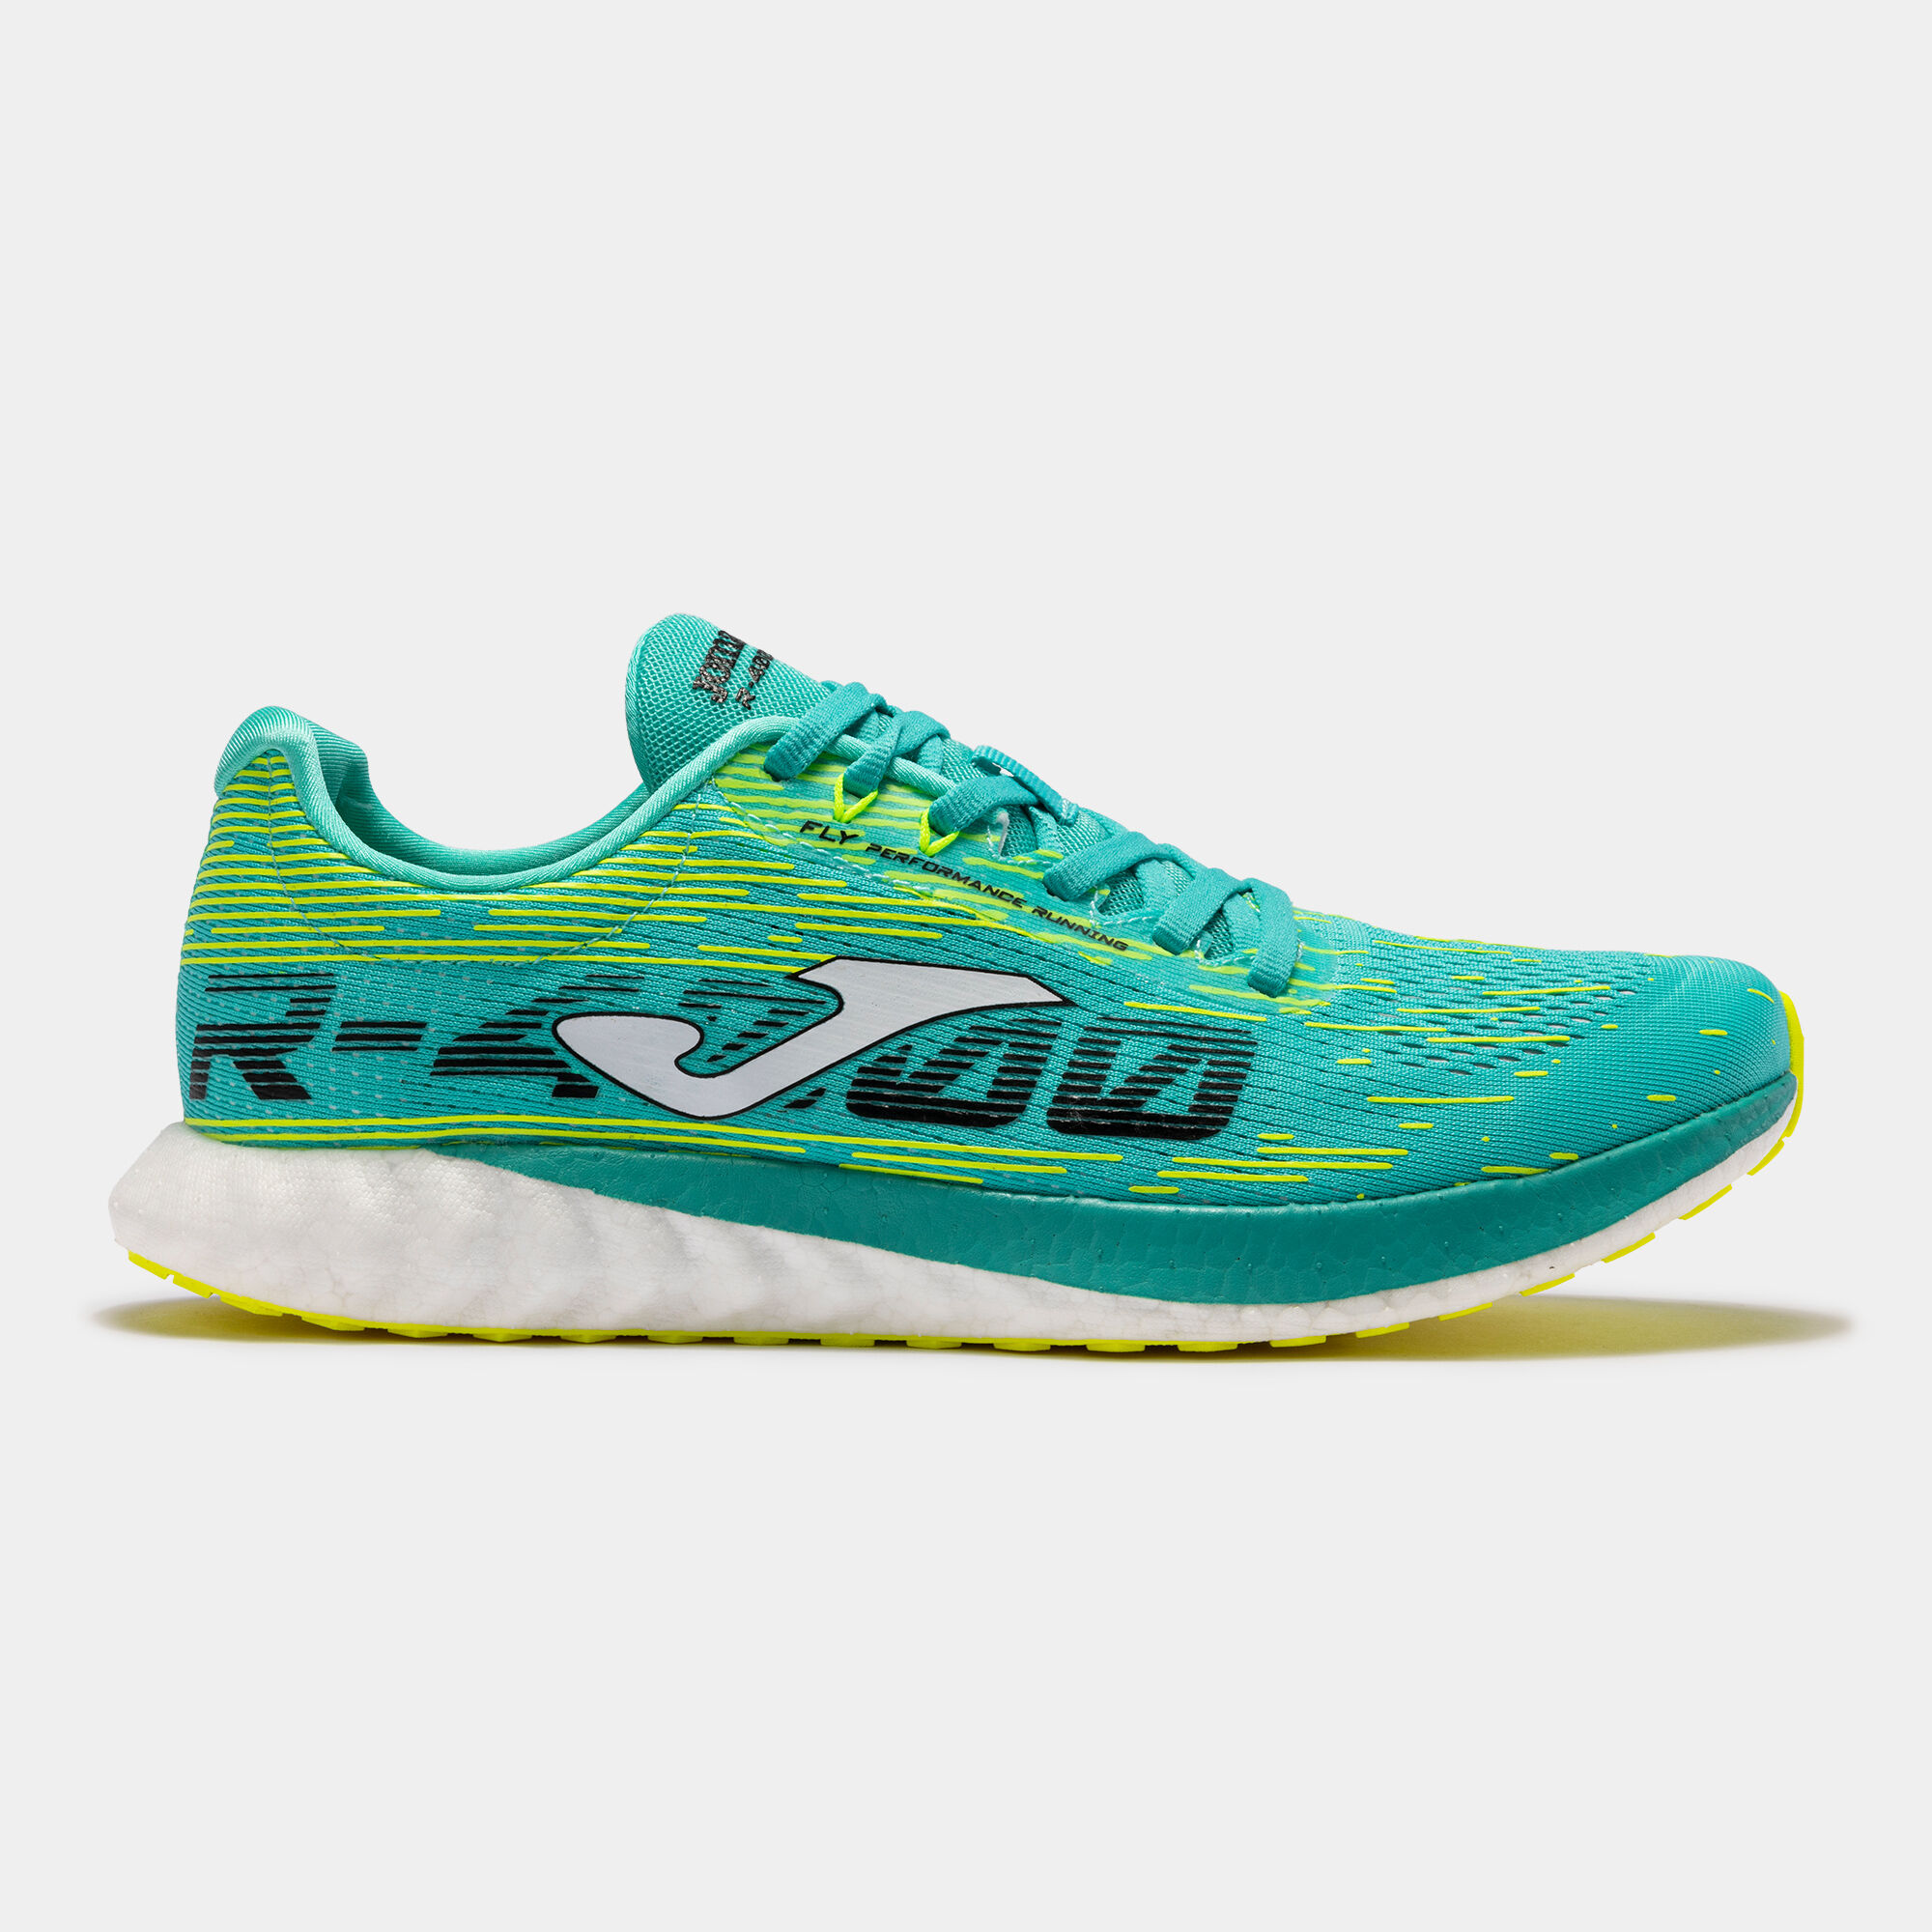 CHAUSSURES RUNNING R.4000 23 HOMME TURQUOISE